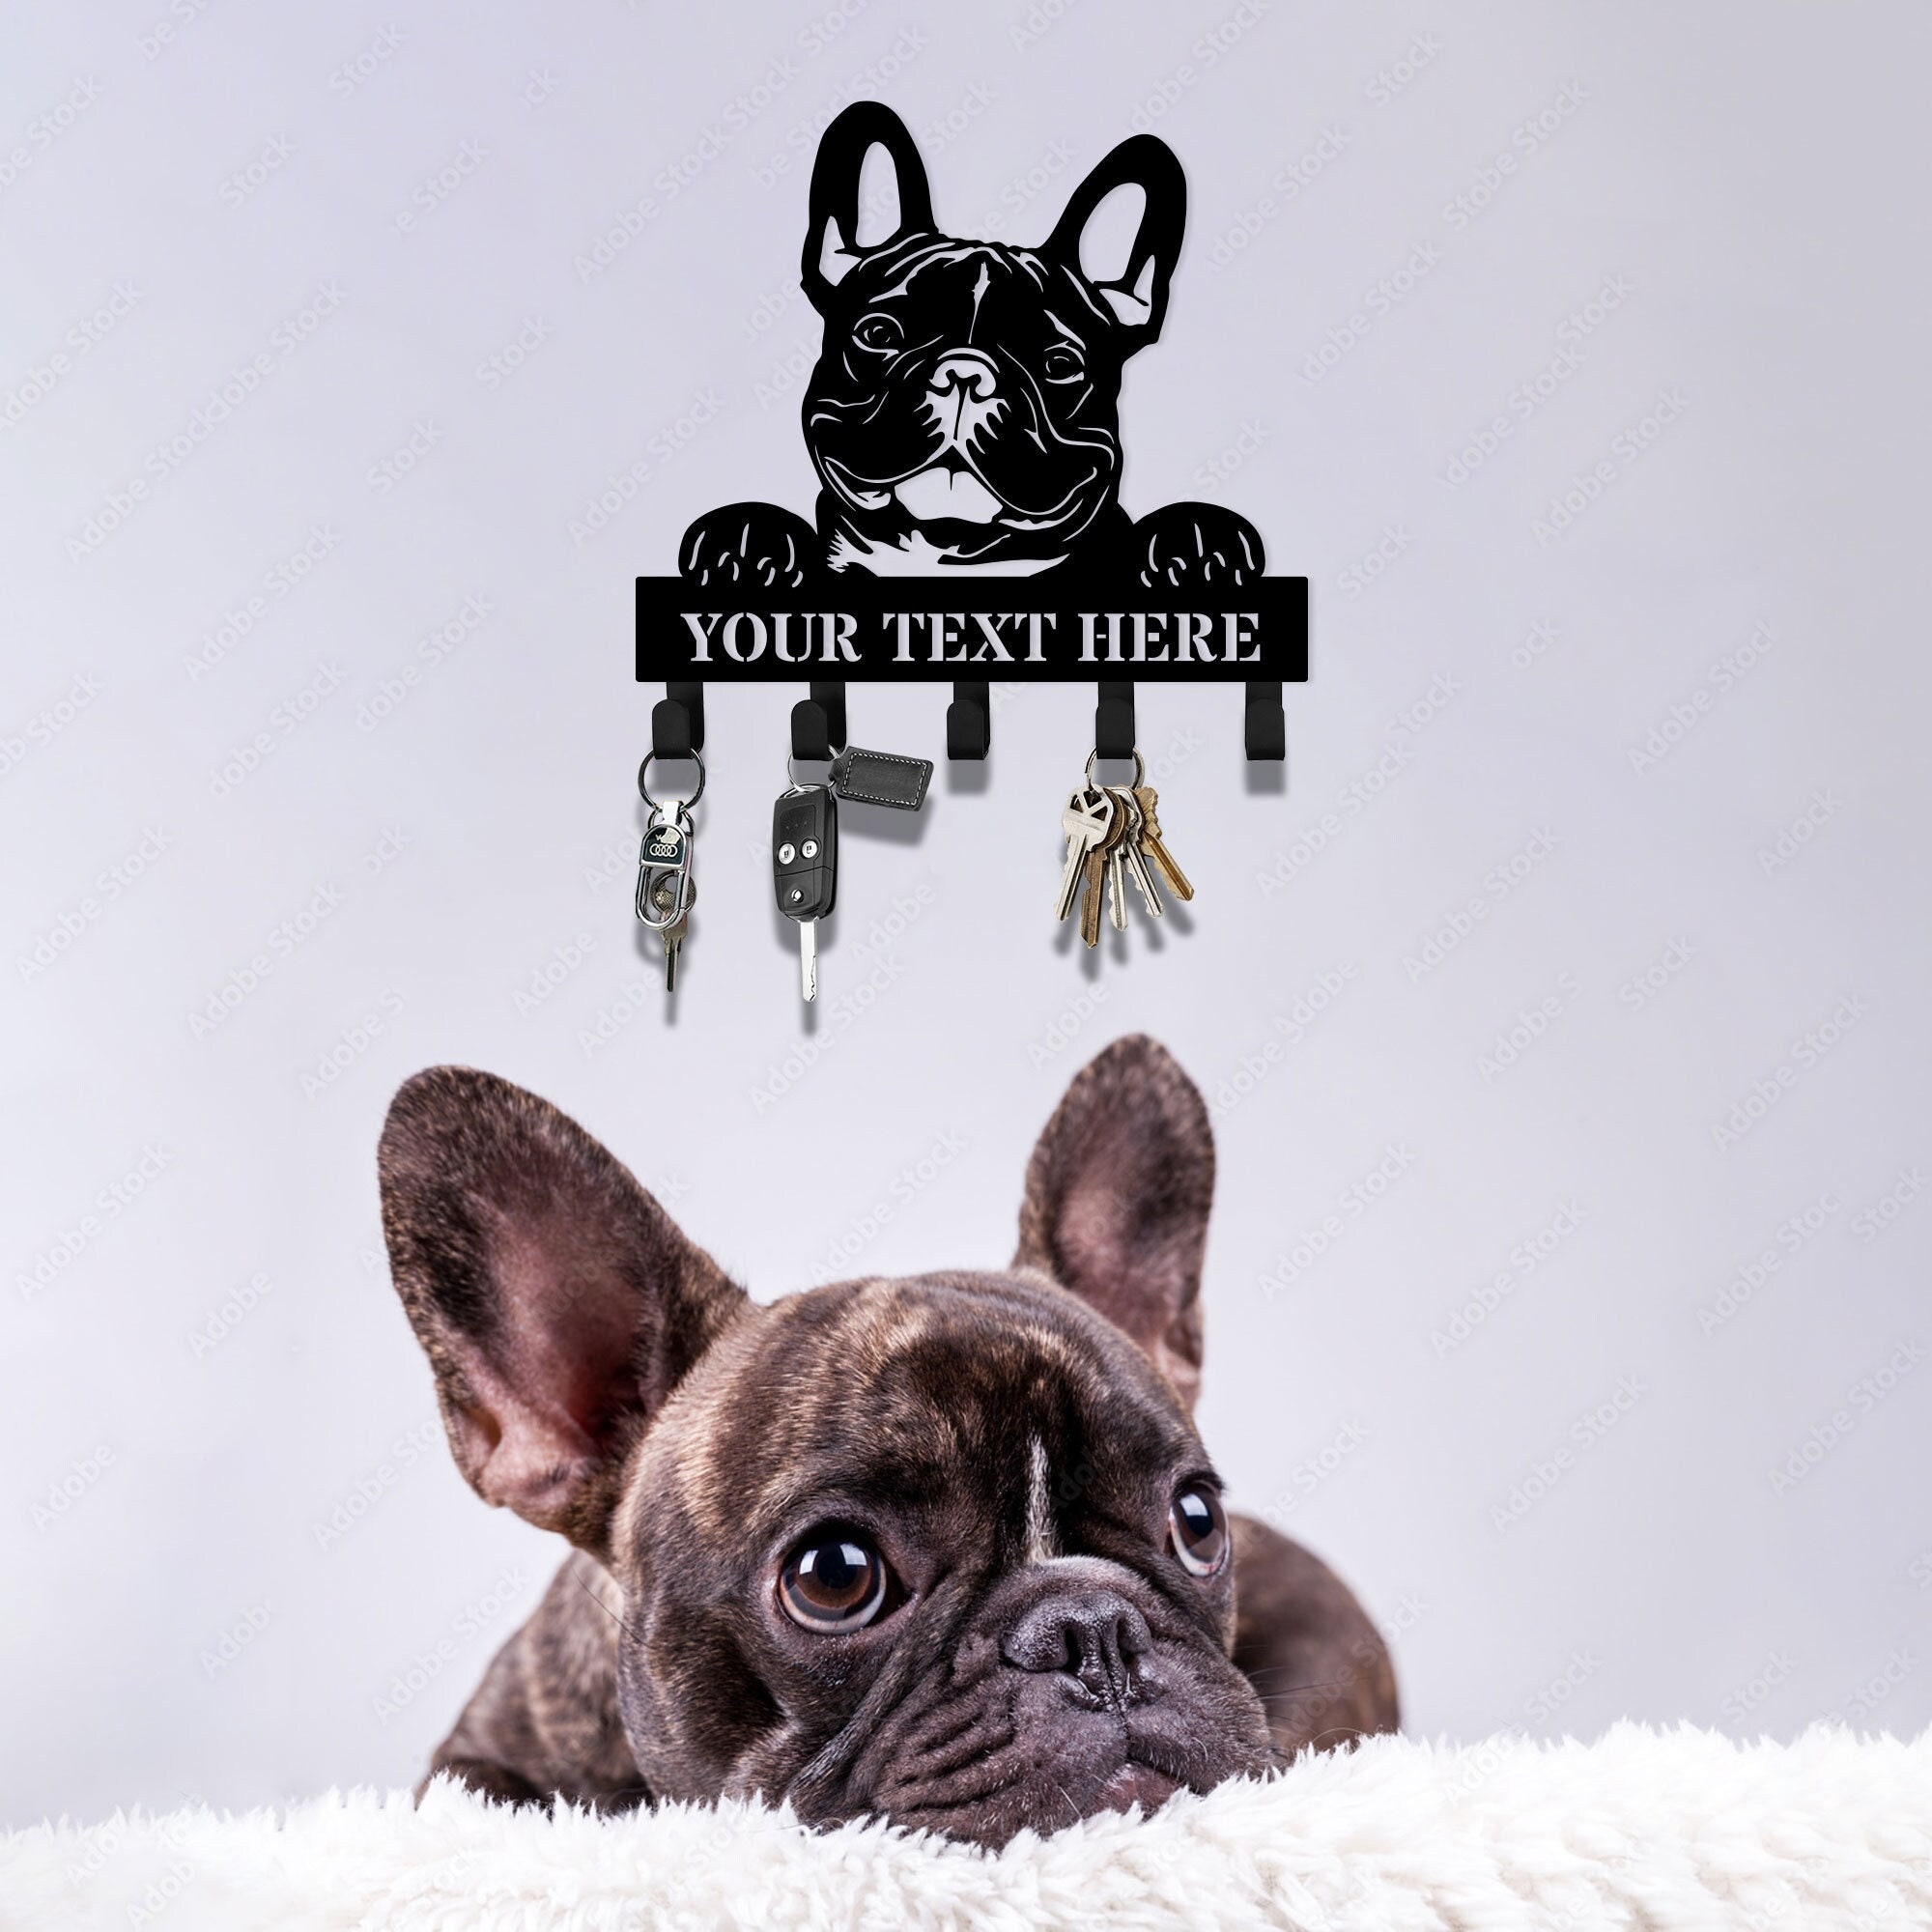 REGODS French Bulldog Dog Sleeping In White Angel Wings Acrylic Keychain,  Gift For Frenchie Lovers, Decorative 2-Sided Keychain Women Girls Bag  Wallet